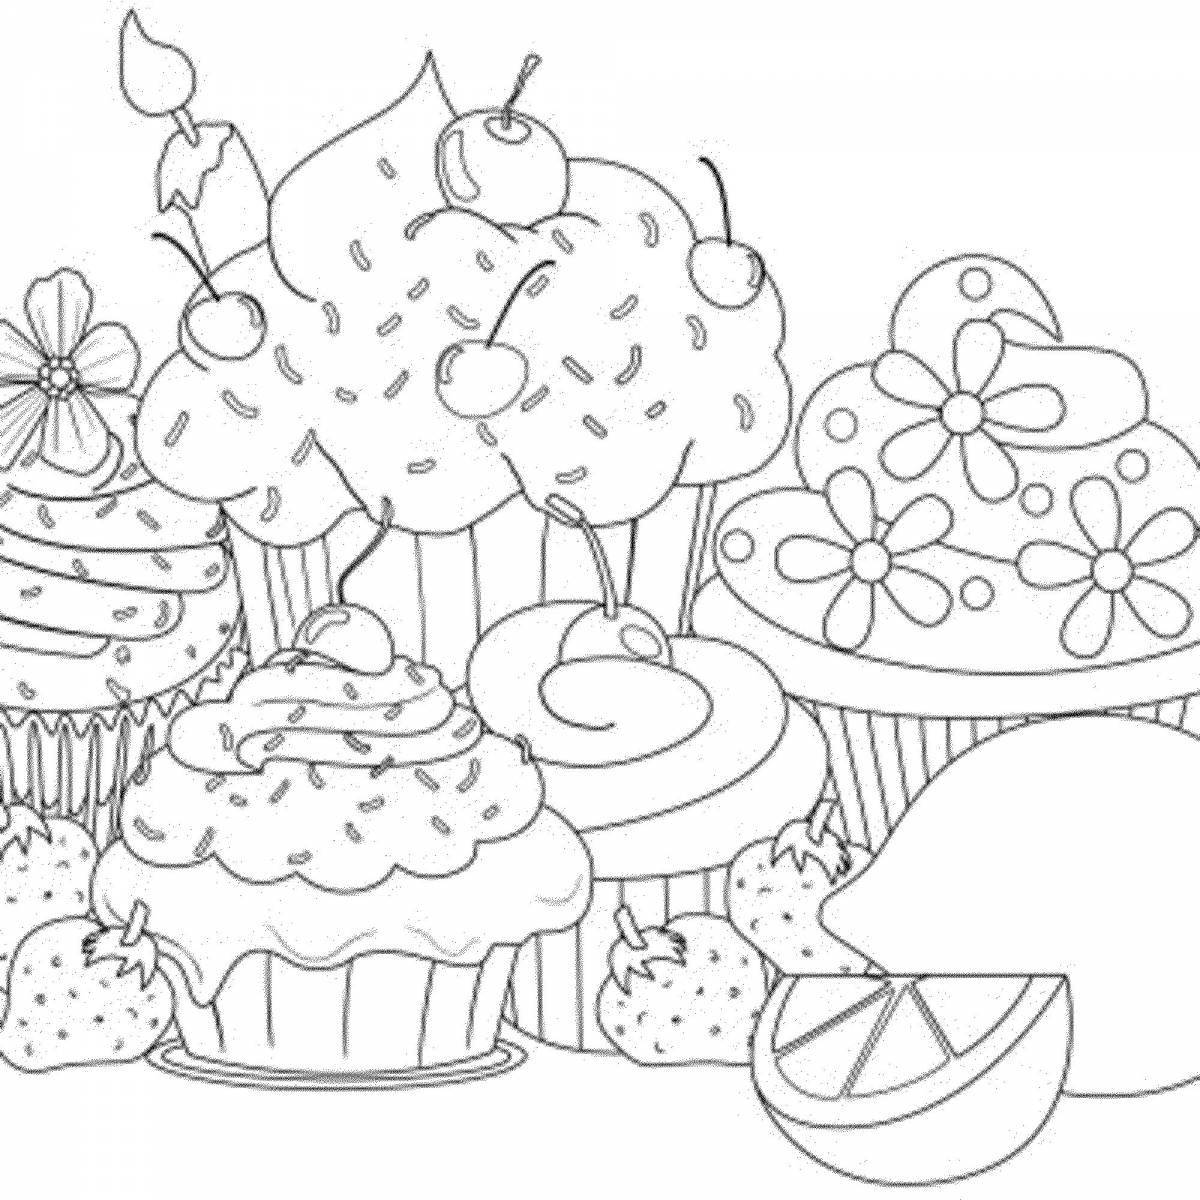 Appetizing coloring book for girls 11 years old food